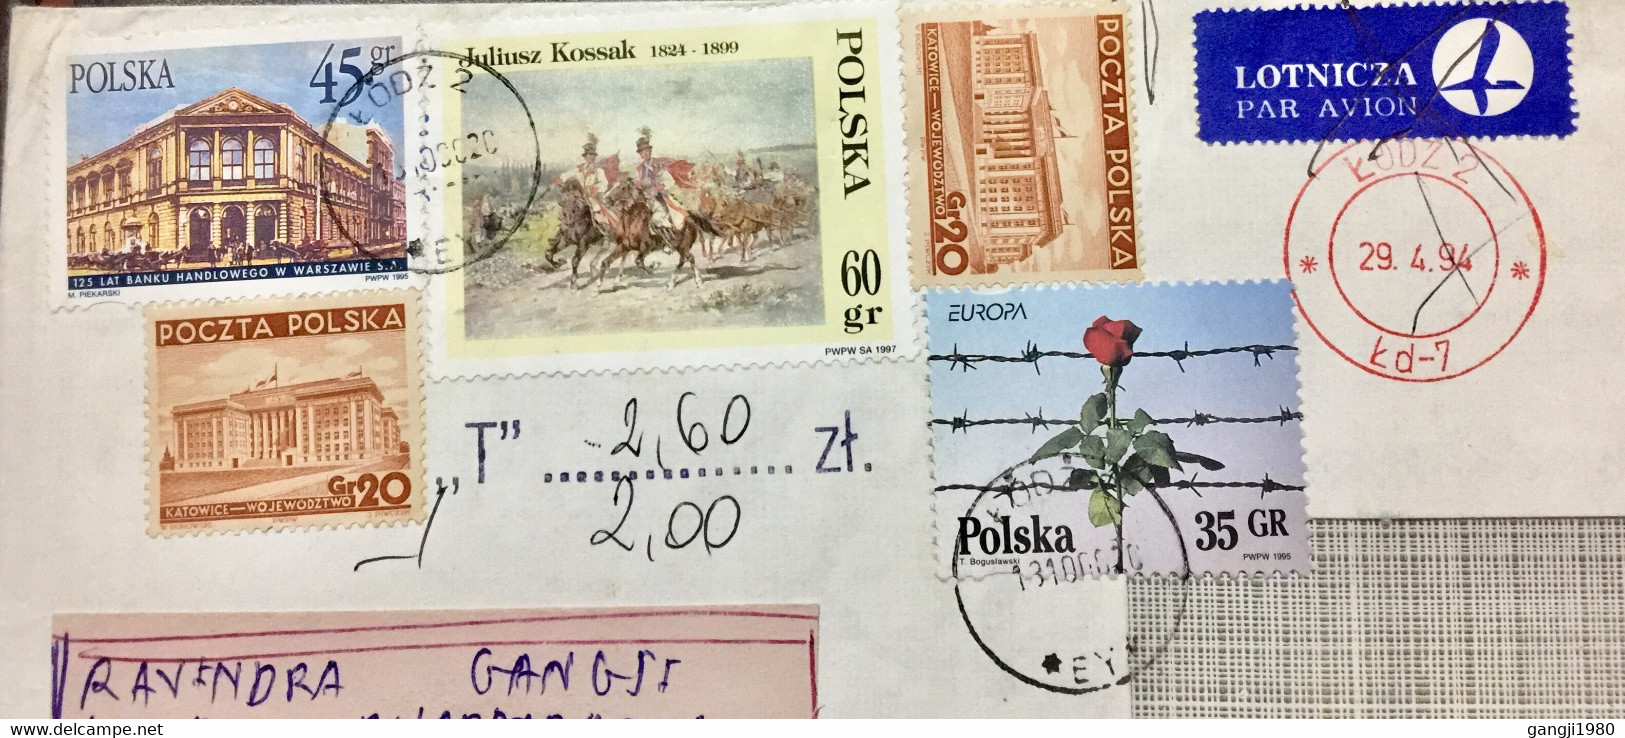 POLAND 2000 ,AIRMAIL METER FRANKED 1994, REUSED COVER EARLY STAMP REJECTED SU DUE “T” 260 ZT, BUILDING,HORSE,FLOWER,PLAN - Brieven En Documenten